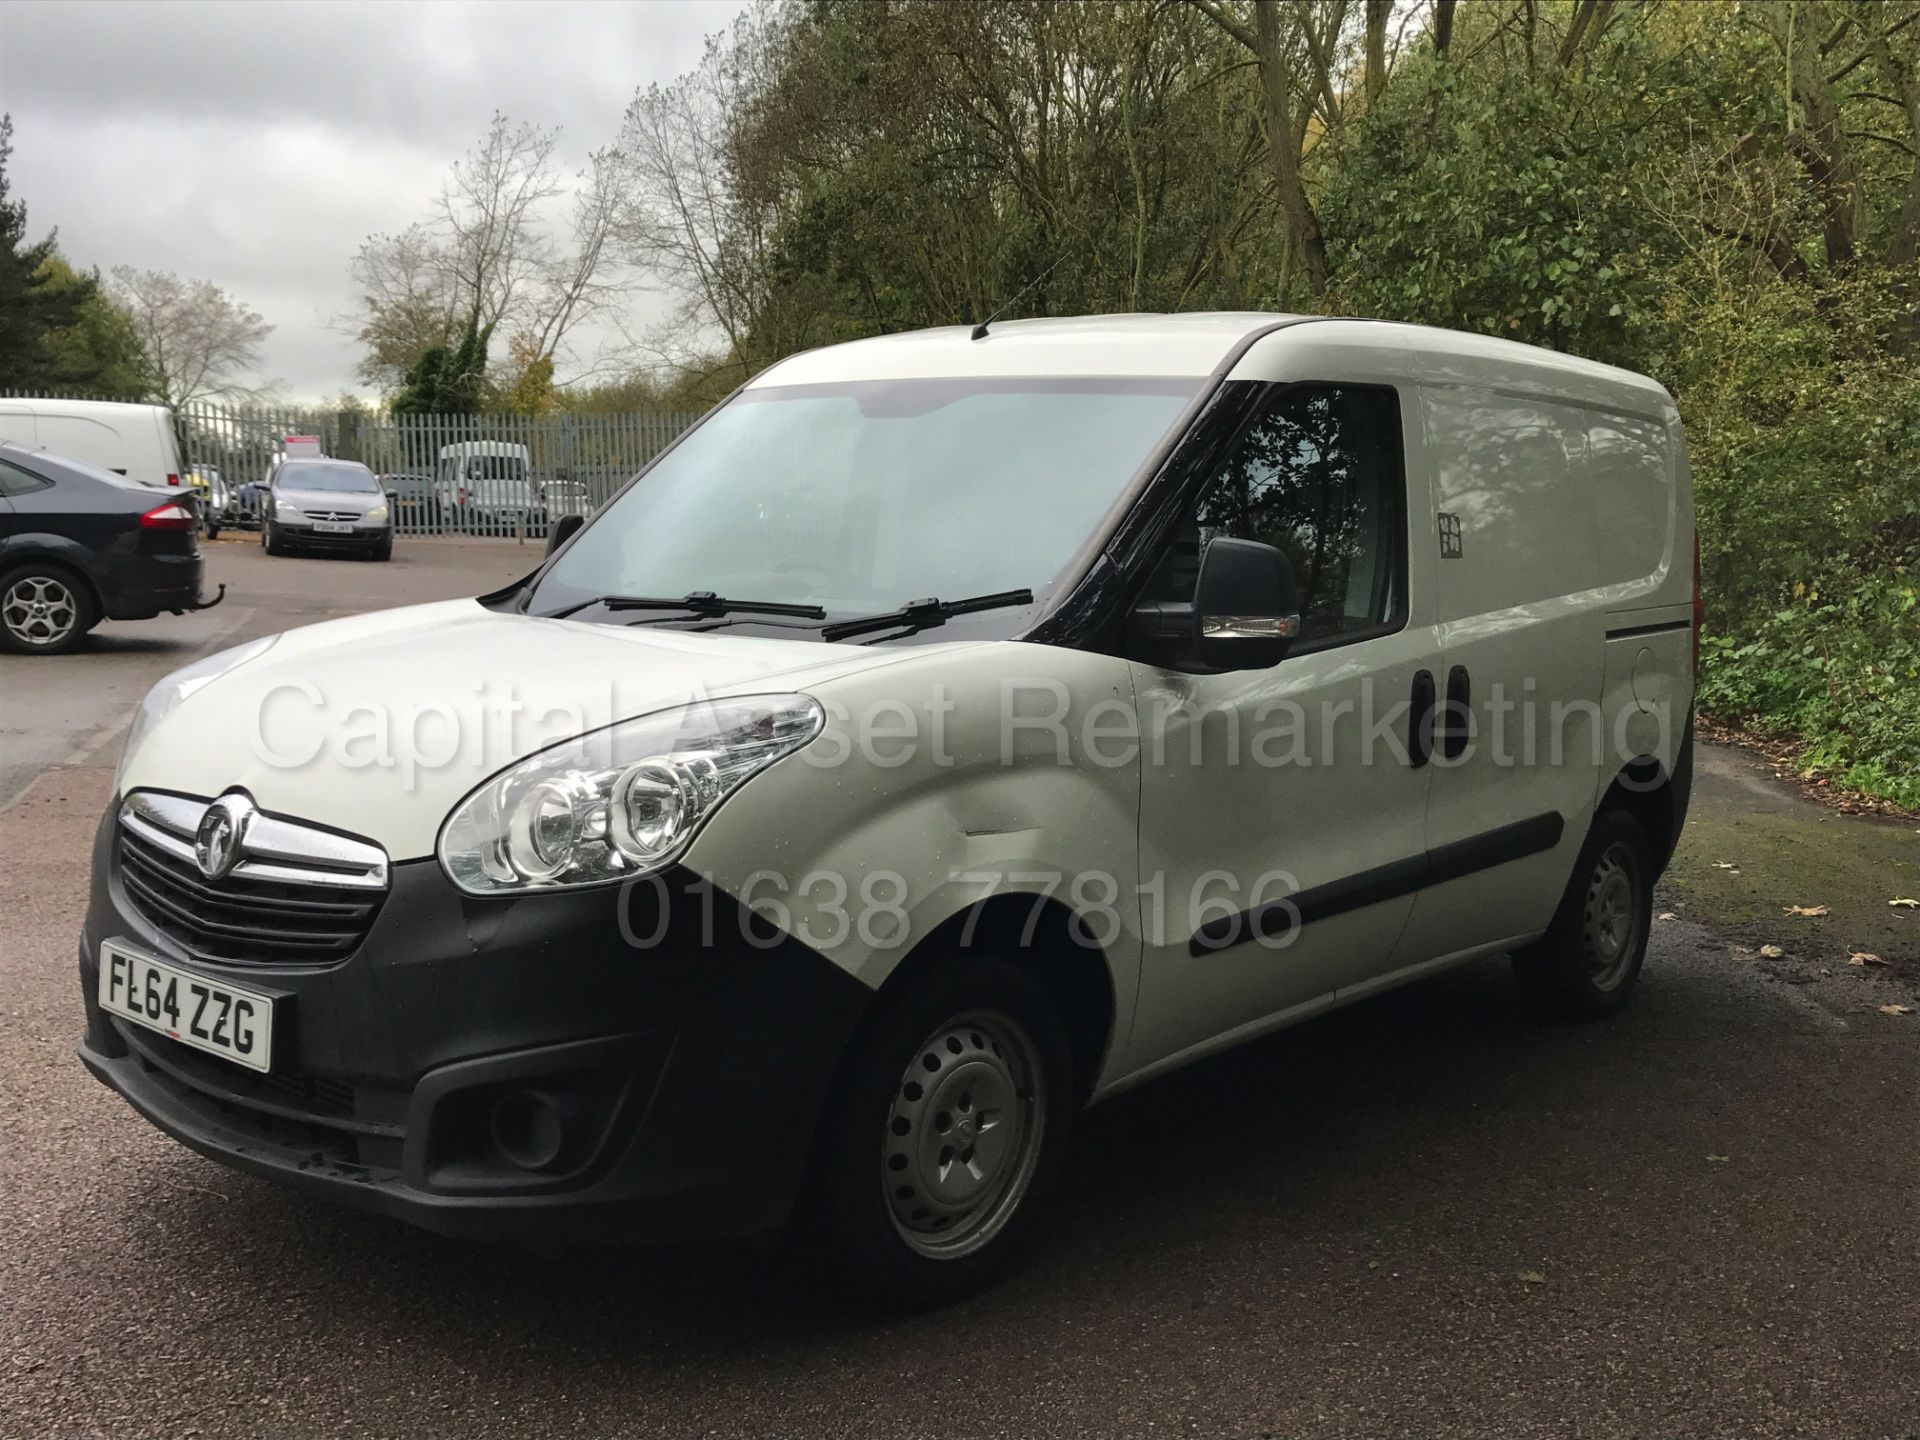 VAUXHALL COMBO 2000 L1H1 (2015 MODEL) 'CDTI - 90 BHP' (1 FORMER COMPANY OWNER FROM NEW) *50 MPG+* - Image 4 of 25